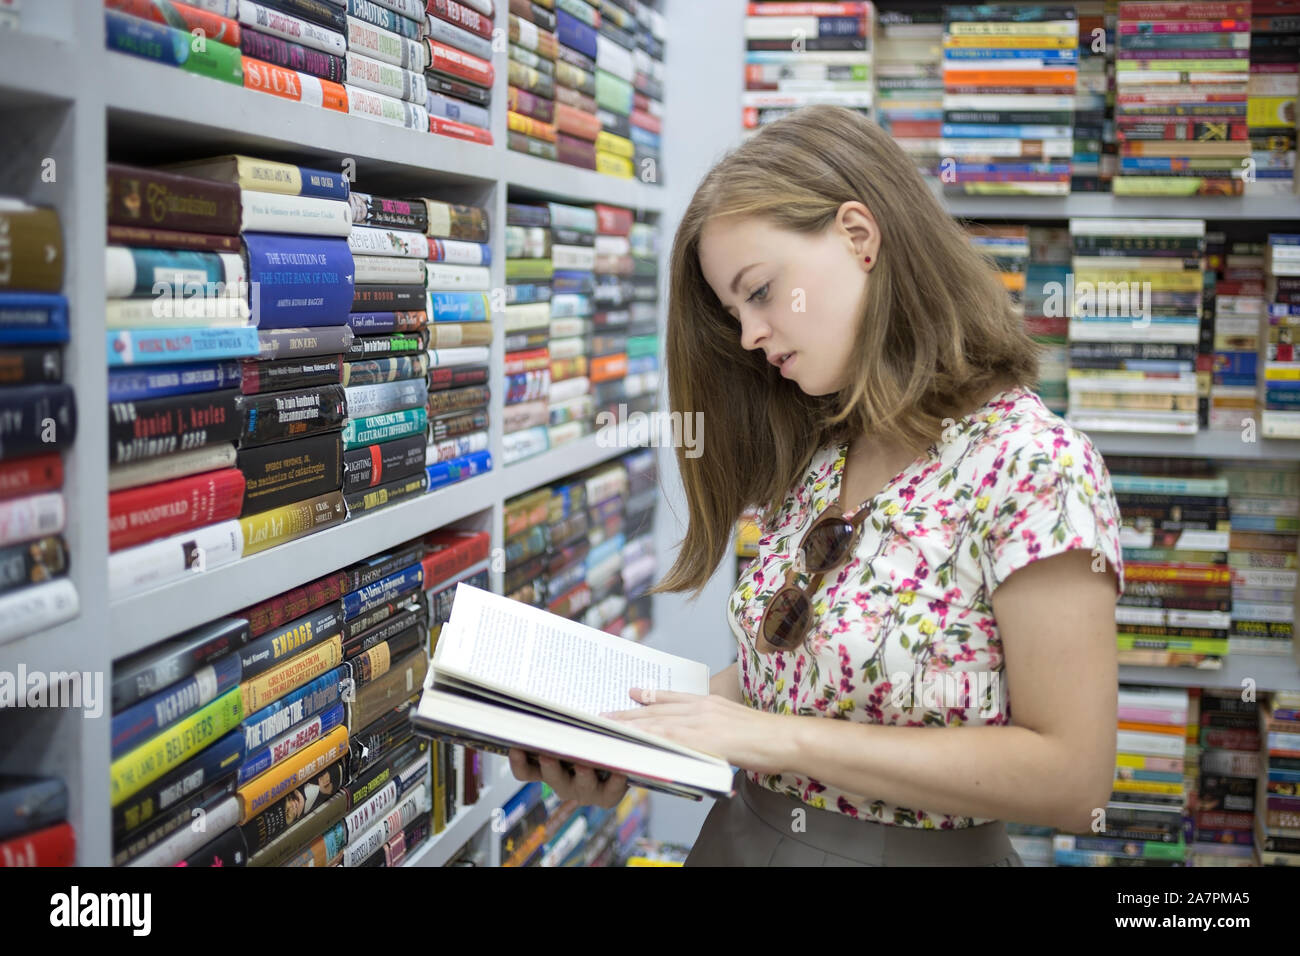 Manila, Philippines - June, 14, 2017: Smiling young caucasian woman girl choosing holding a book in library or bookstore Stock Photo